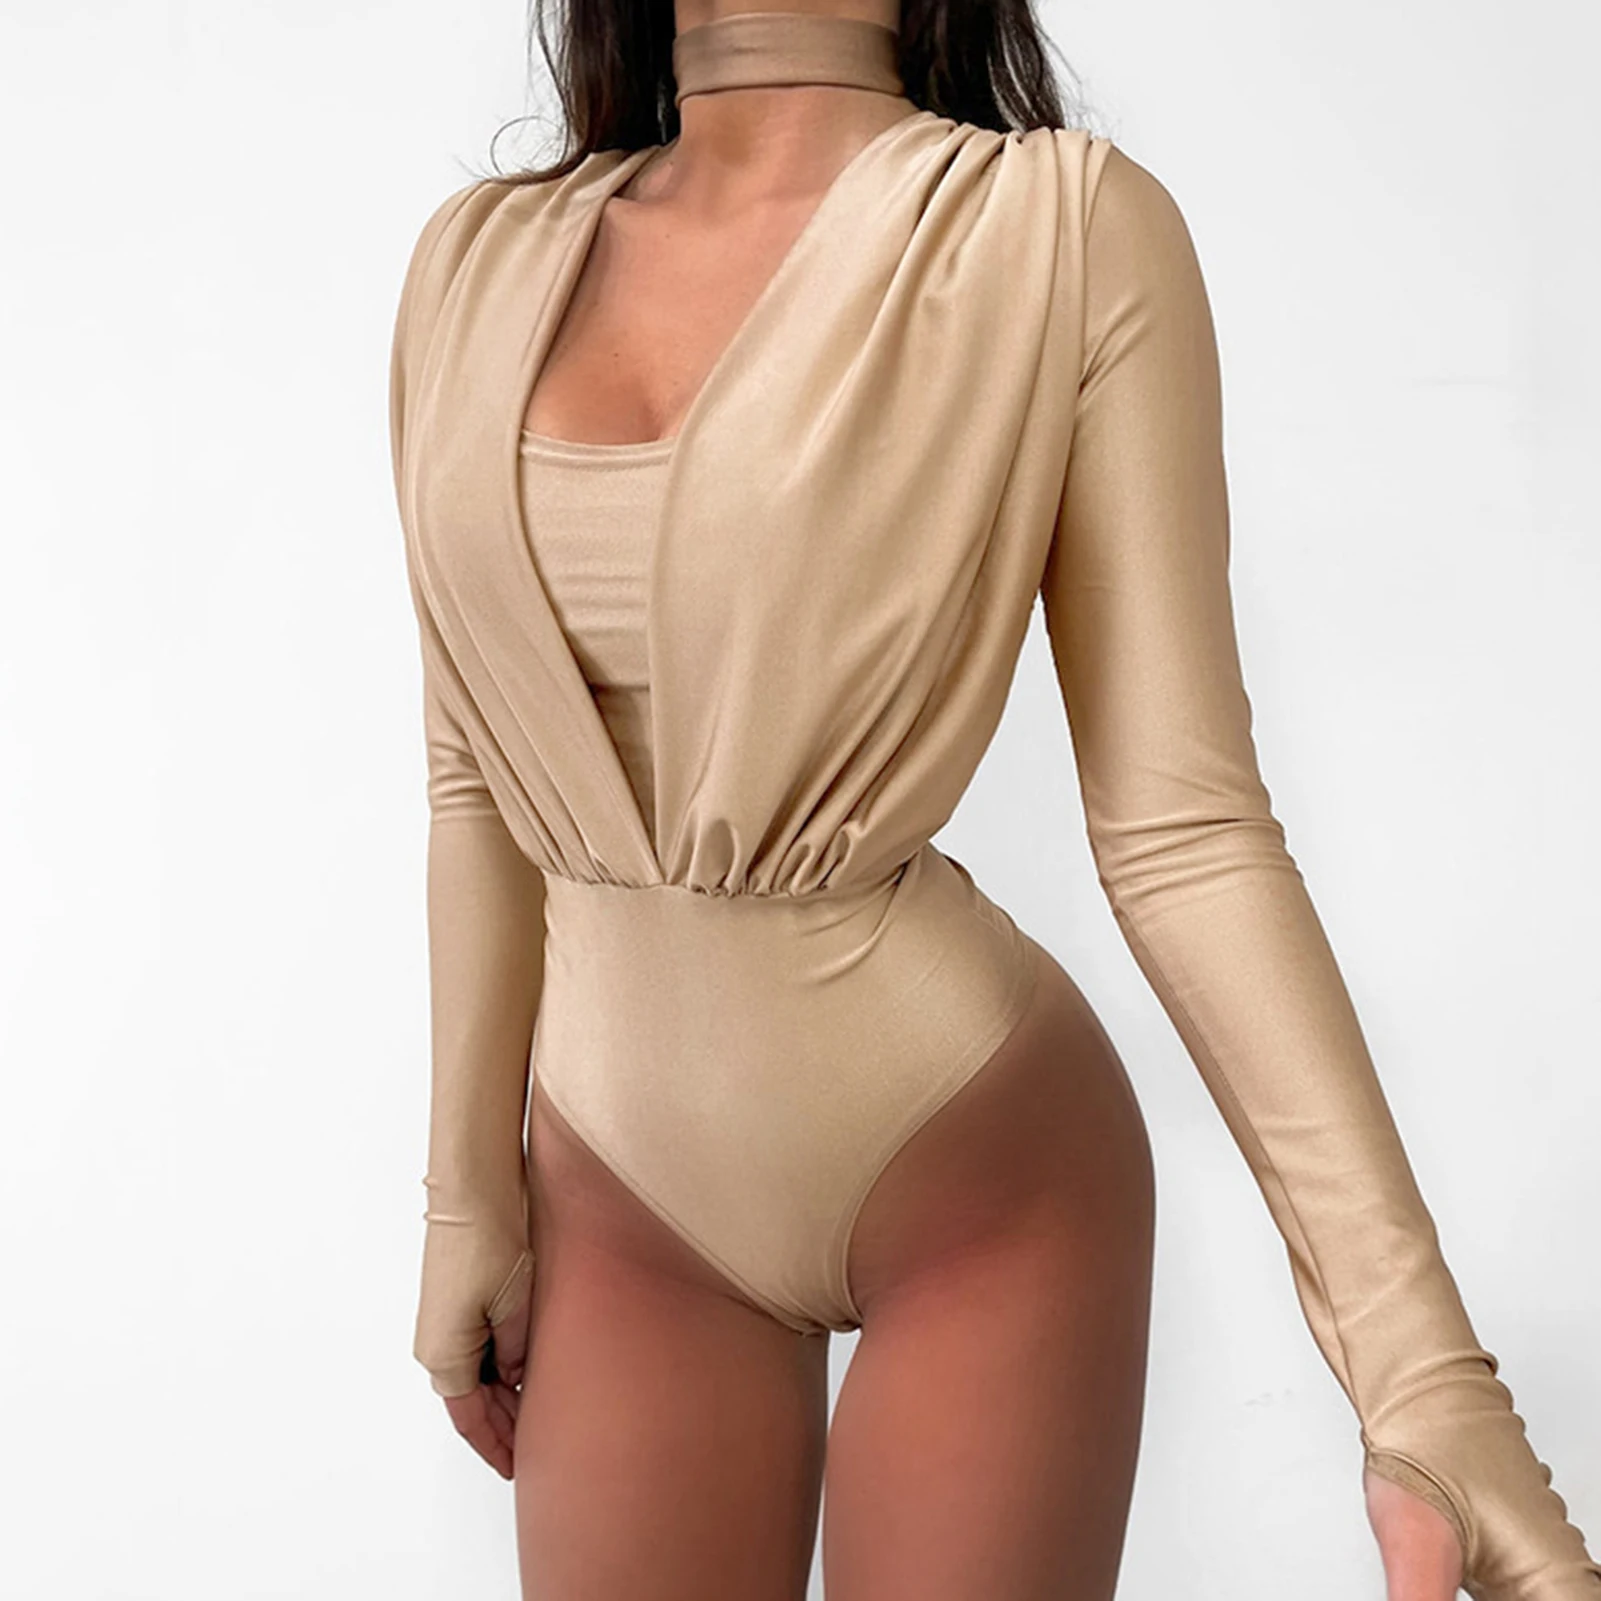 

Low Cut Women One Piece Rompers Ladies Bodycon Playsuits Long Sleeve Silk Tunic Jumpsuit Patchwork Deep V Neck Beachwear Outfit